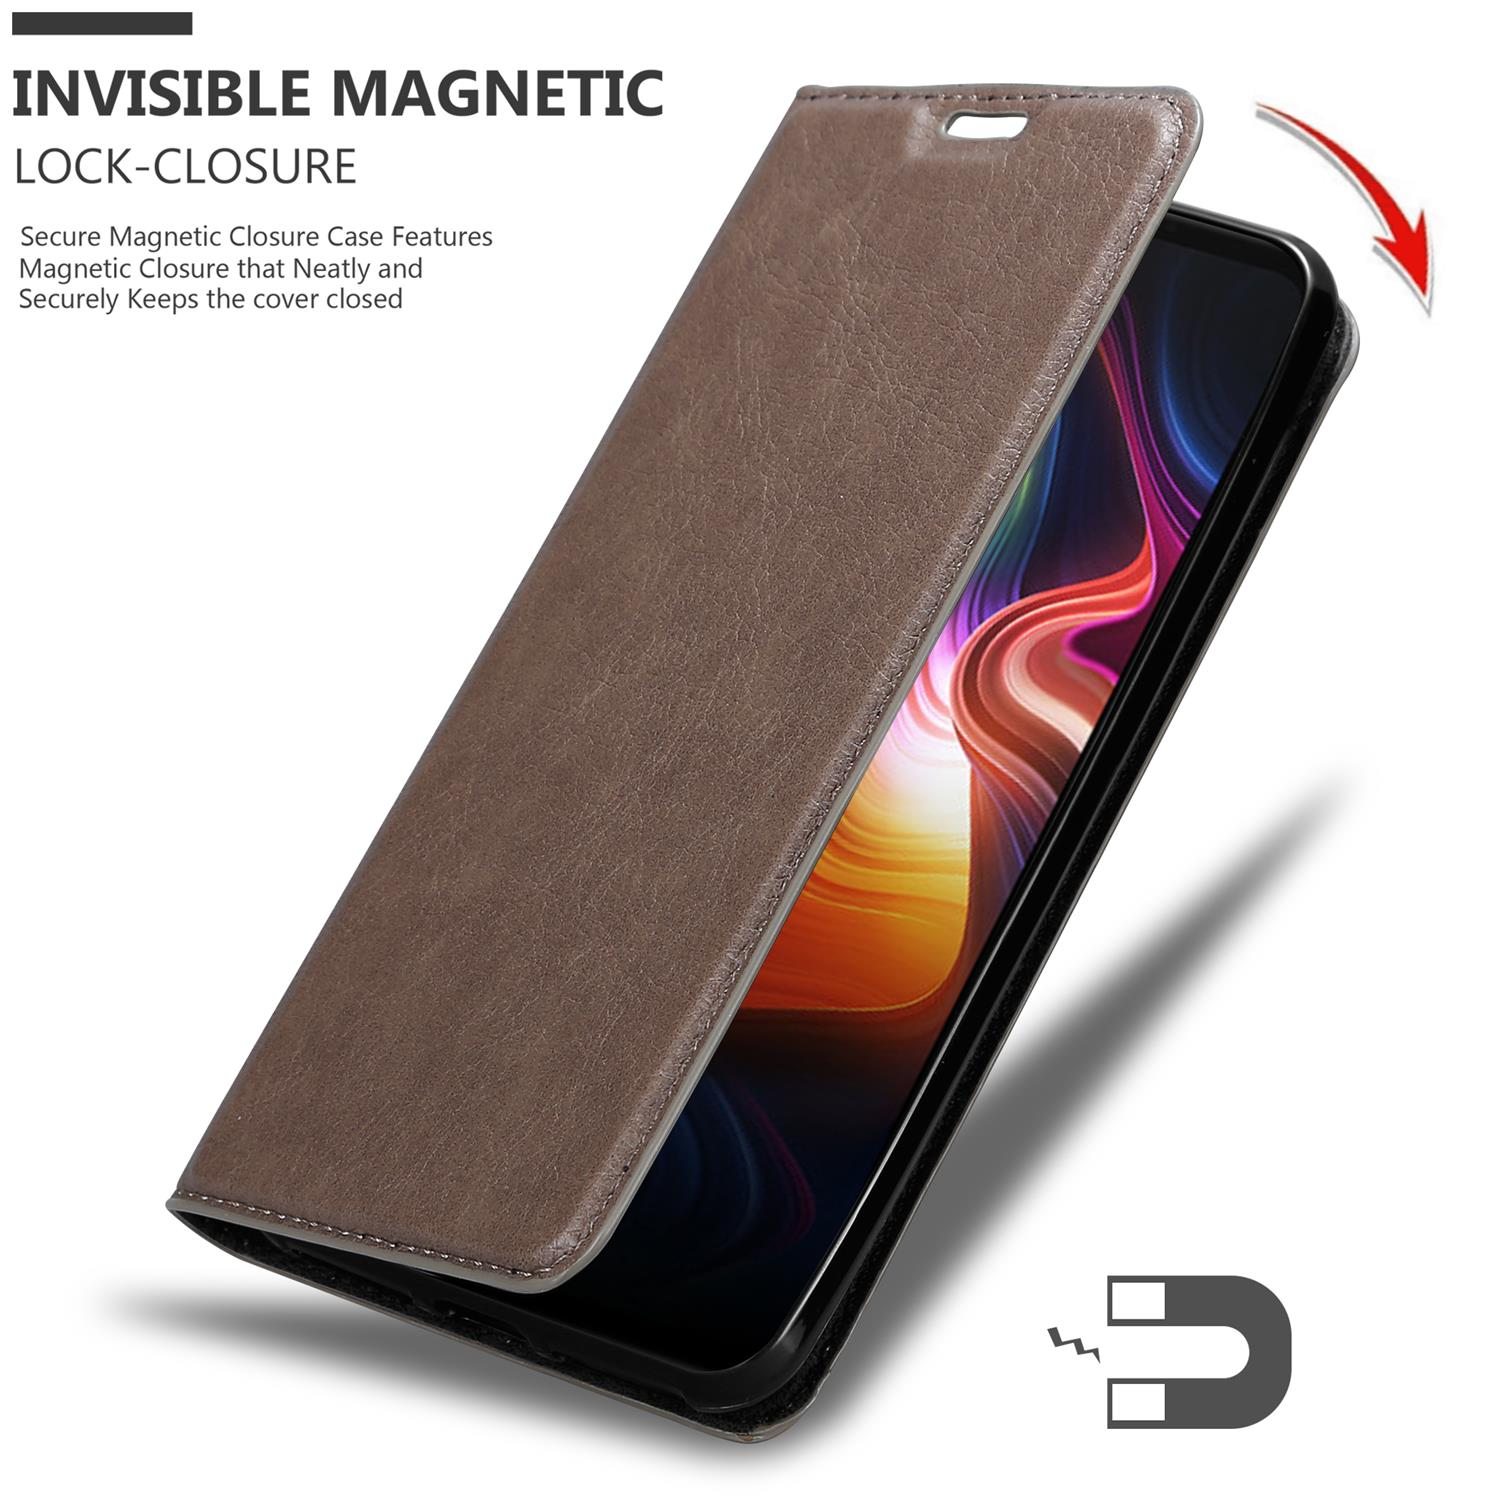 Magnet, 5G, Nubia PLAY ZTE, BRAUN CADORABO Book Invisible KAFFEE Bookcover, Hülle